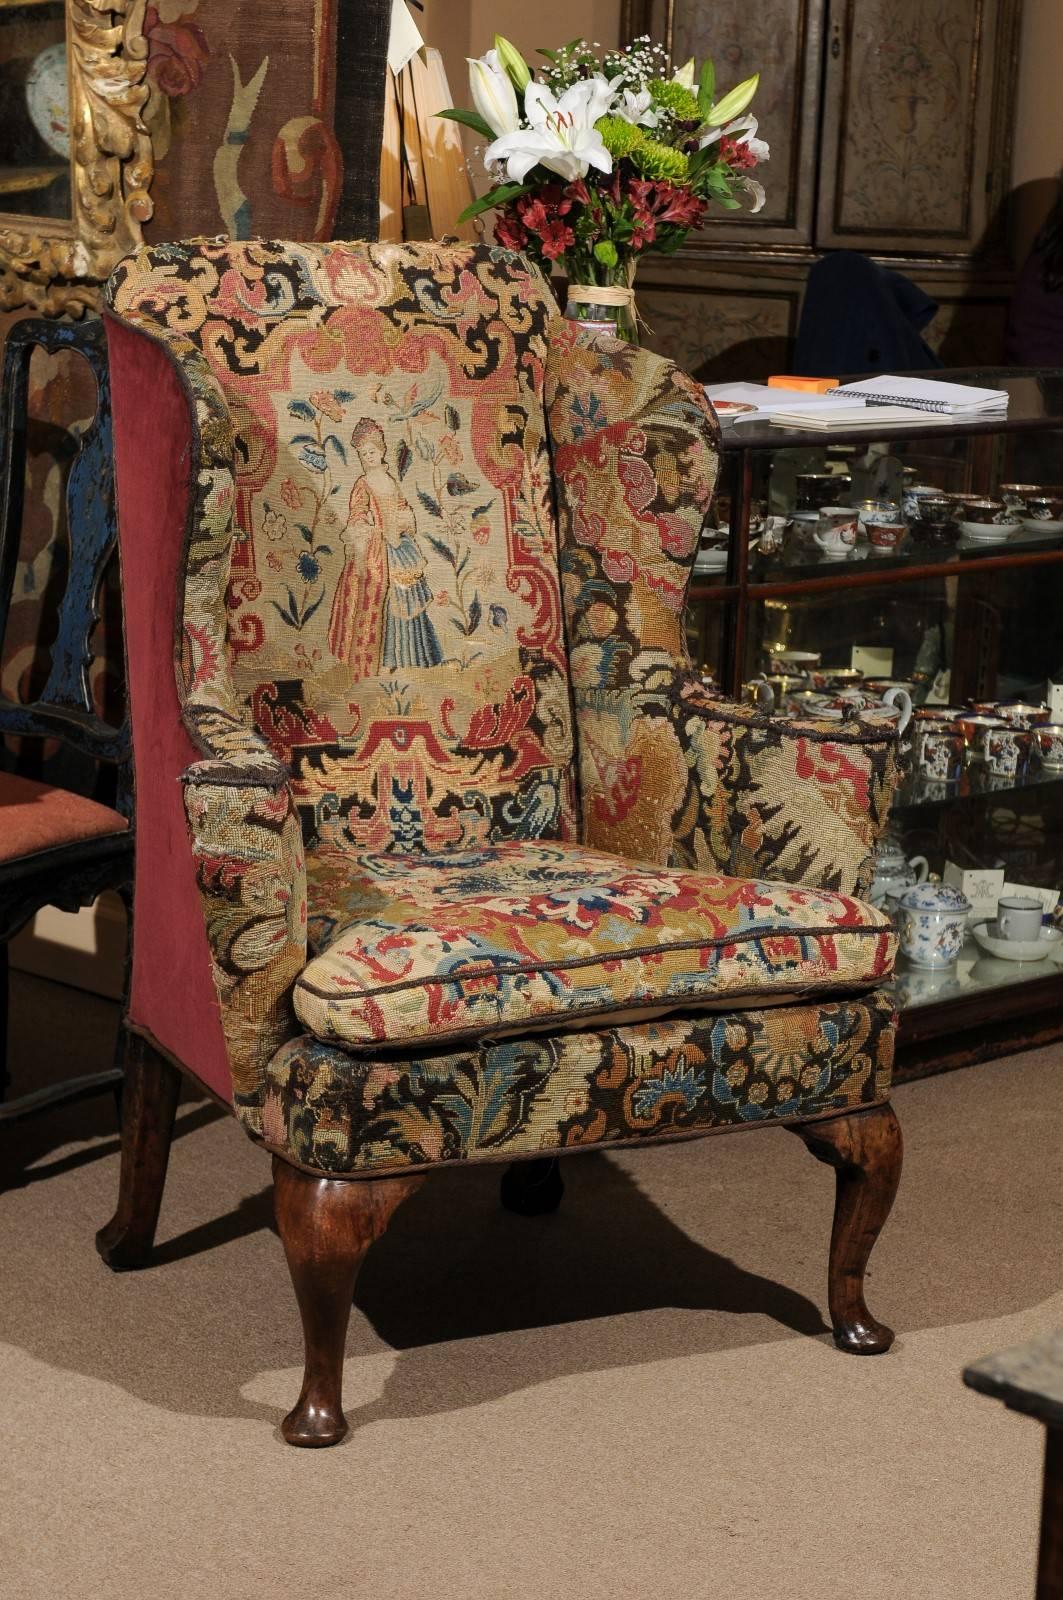 Walnut Queen Anne Wing chair upholstered in needlepoint tapestry featuring a woman in fancy dress with flowers and a bird. Back and sides upholstered in burgundy velvet.